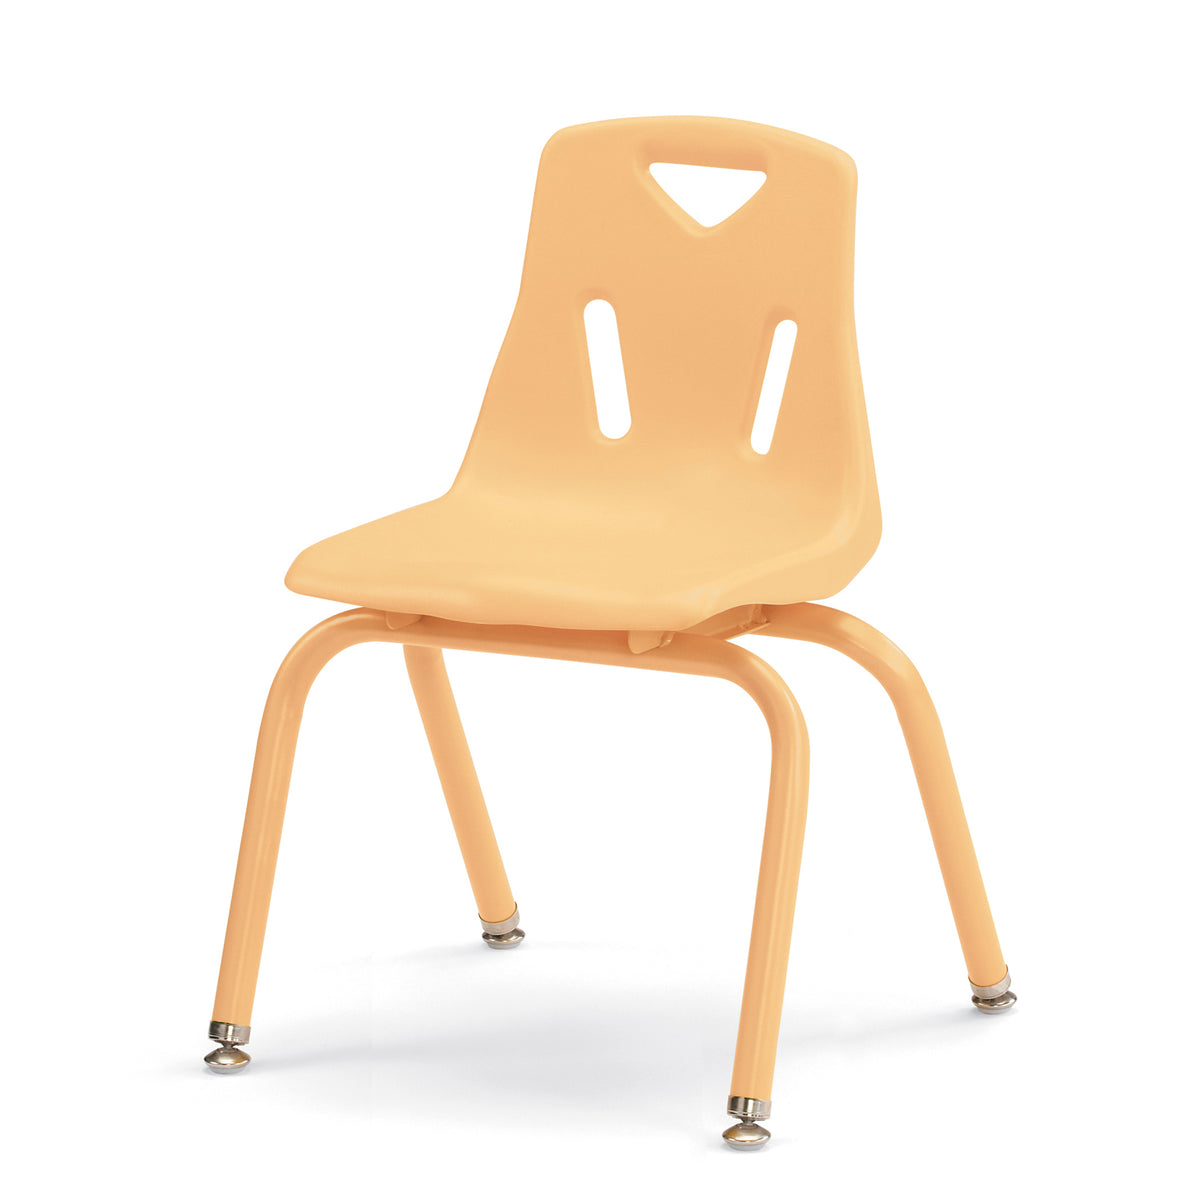 8124JC1251, Berries Stacking Chair with Powder-Coated Legs - 14" Ht - Camel